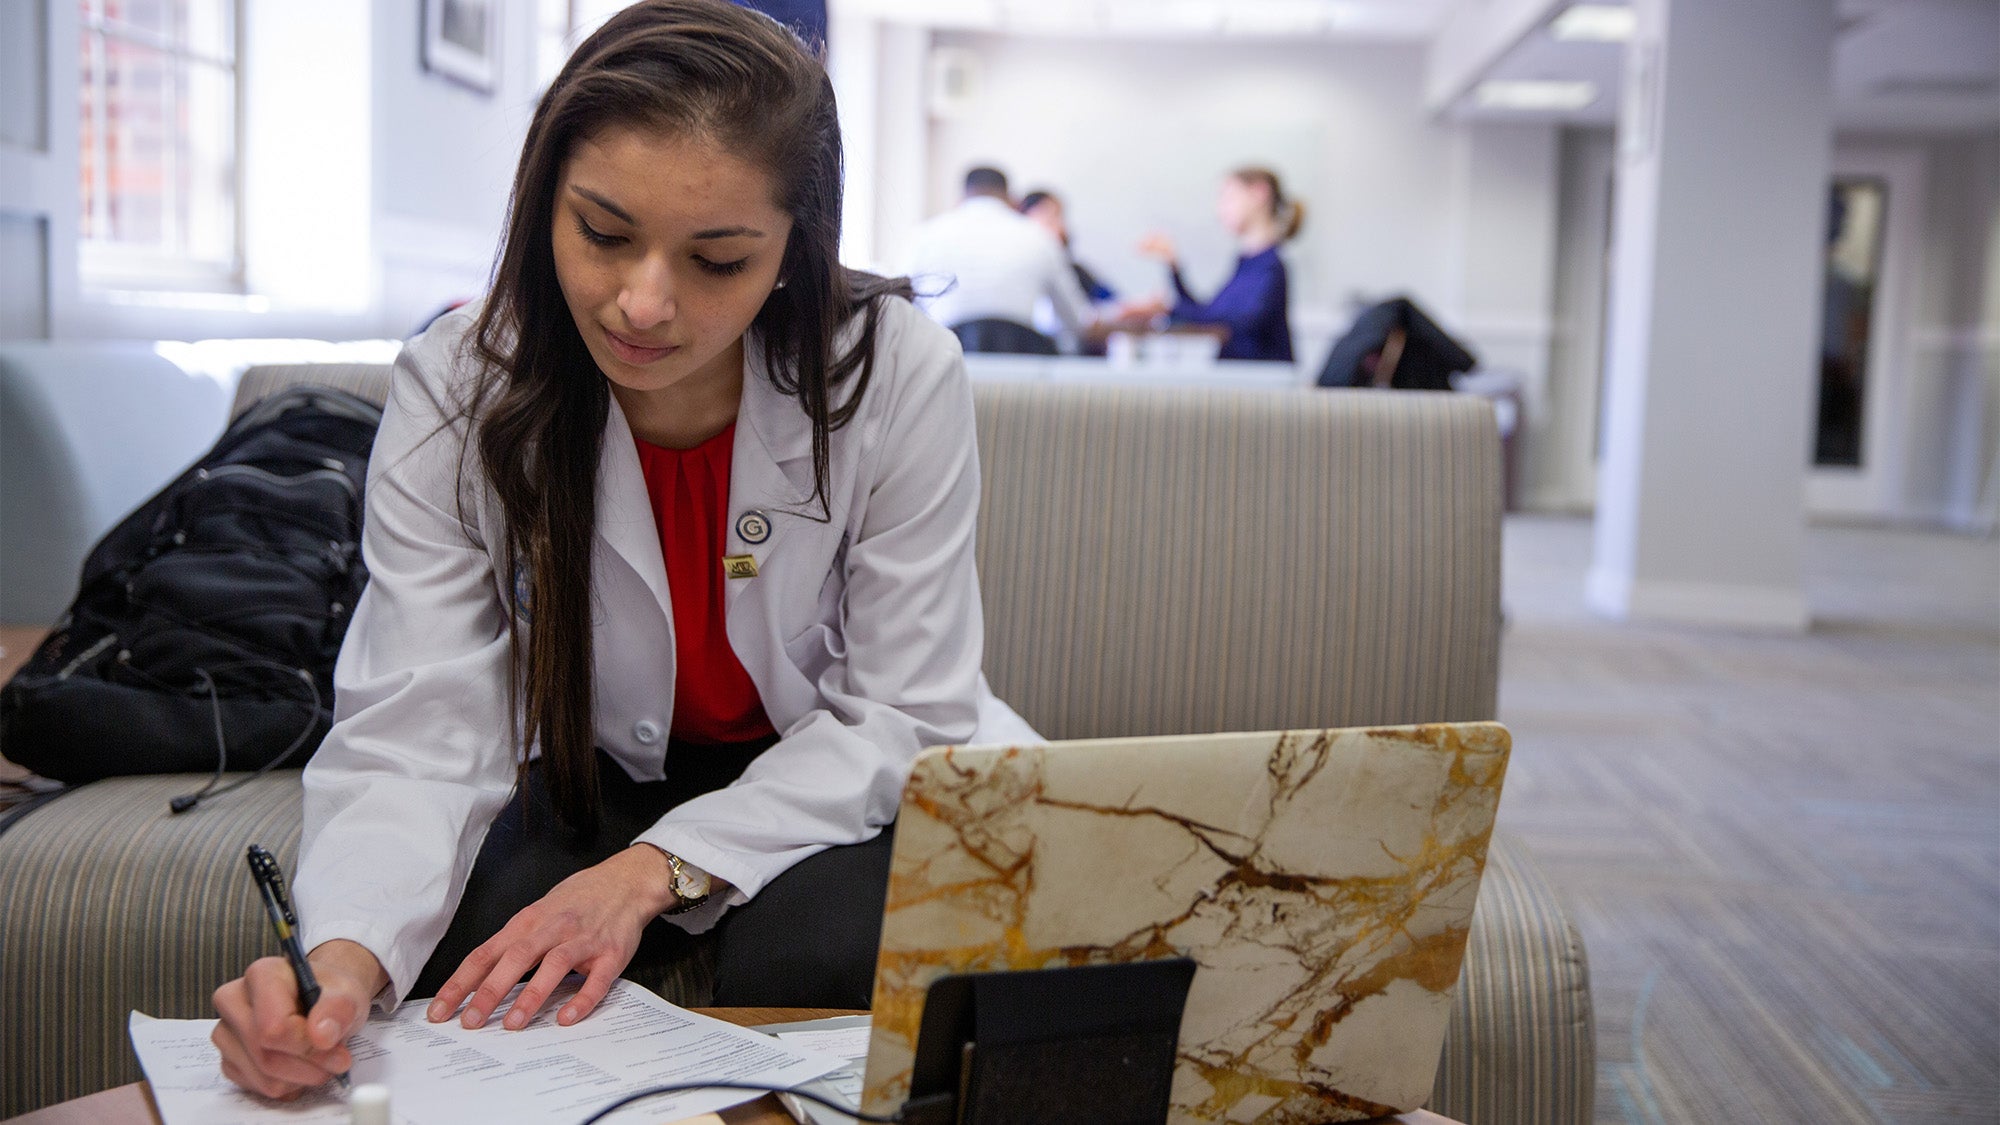 A medical student studies at her computer in a common area on campus